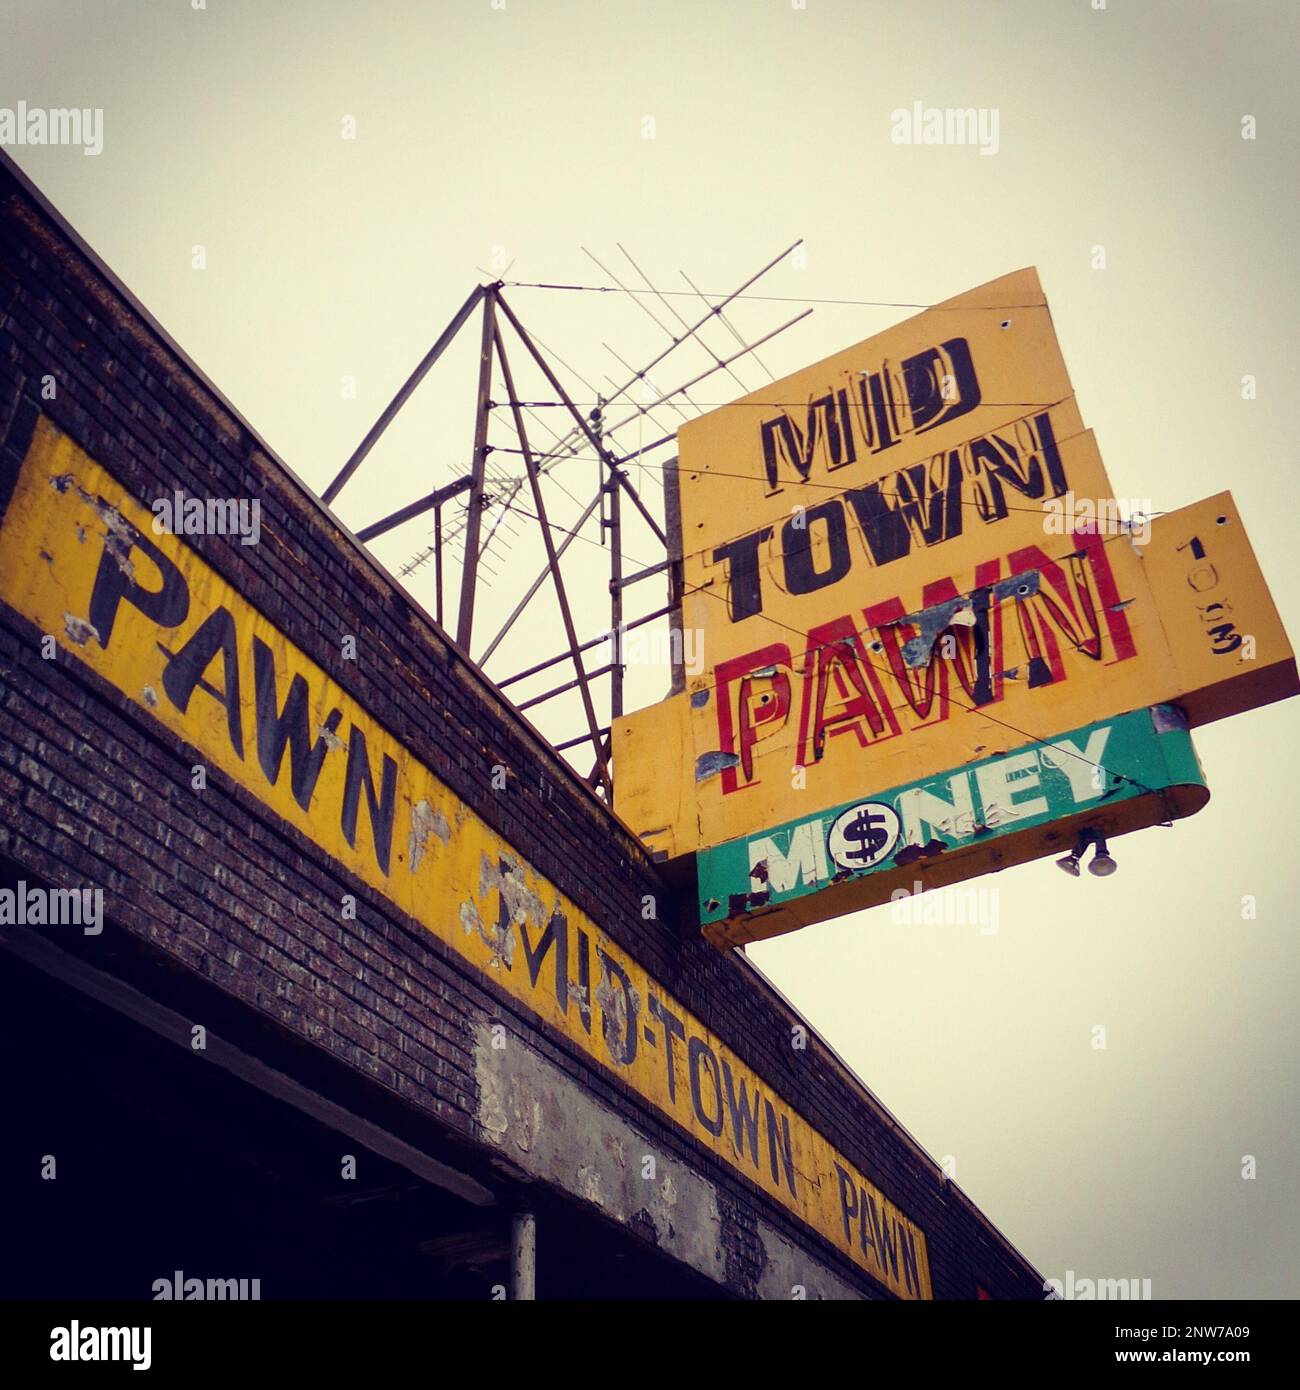 VINTAGE MIDTOWN PAWN SHOP STOREFRONT AND SIGN Stock Photo